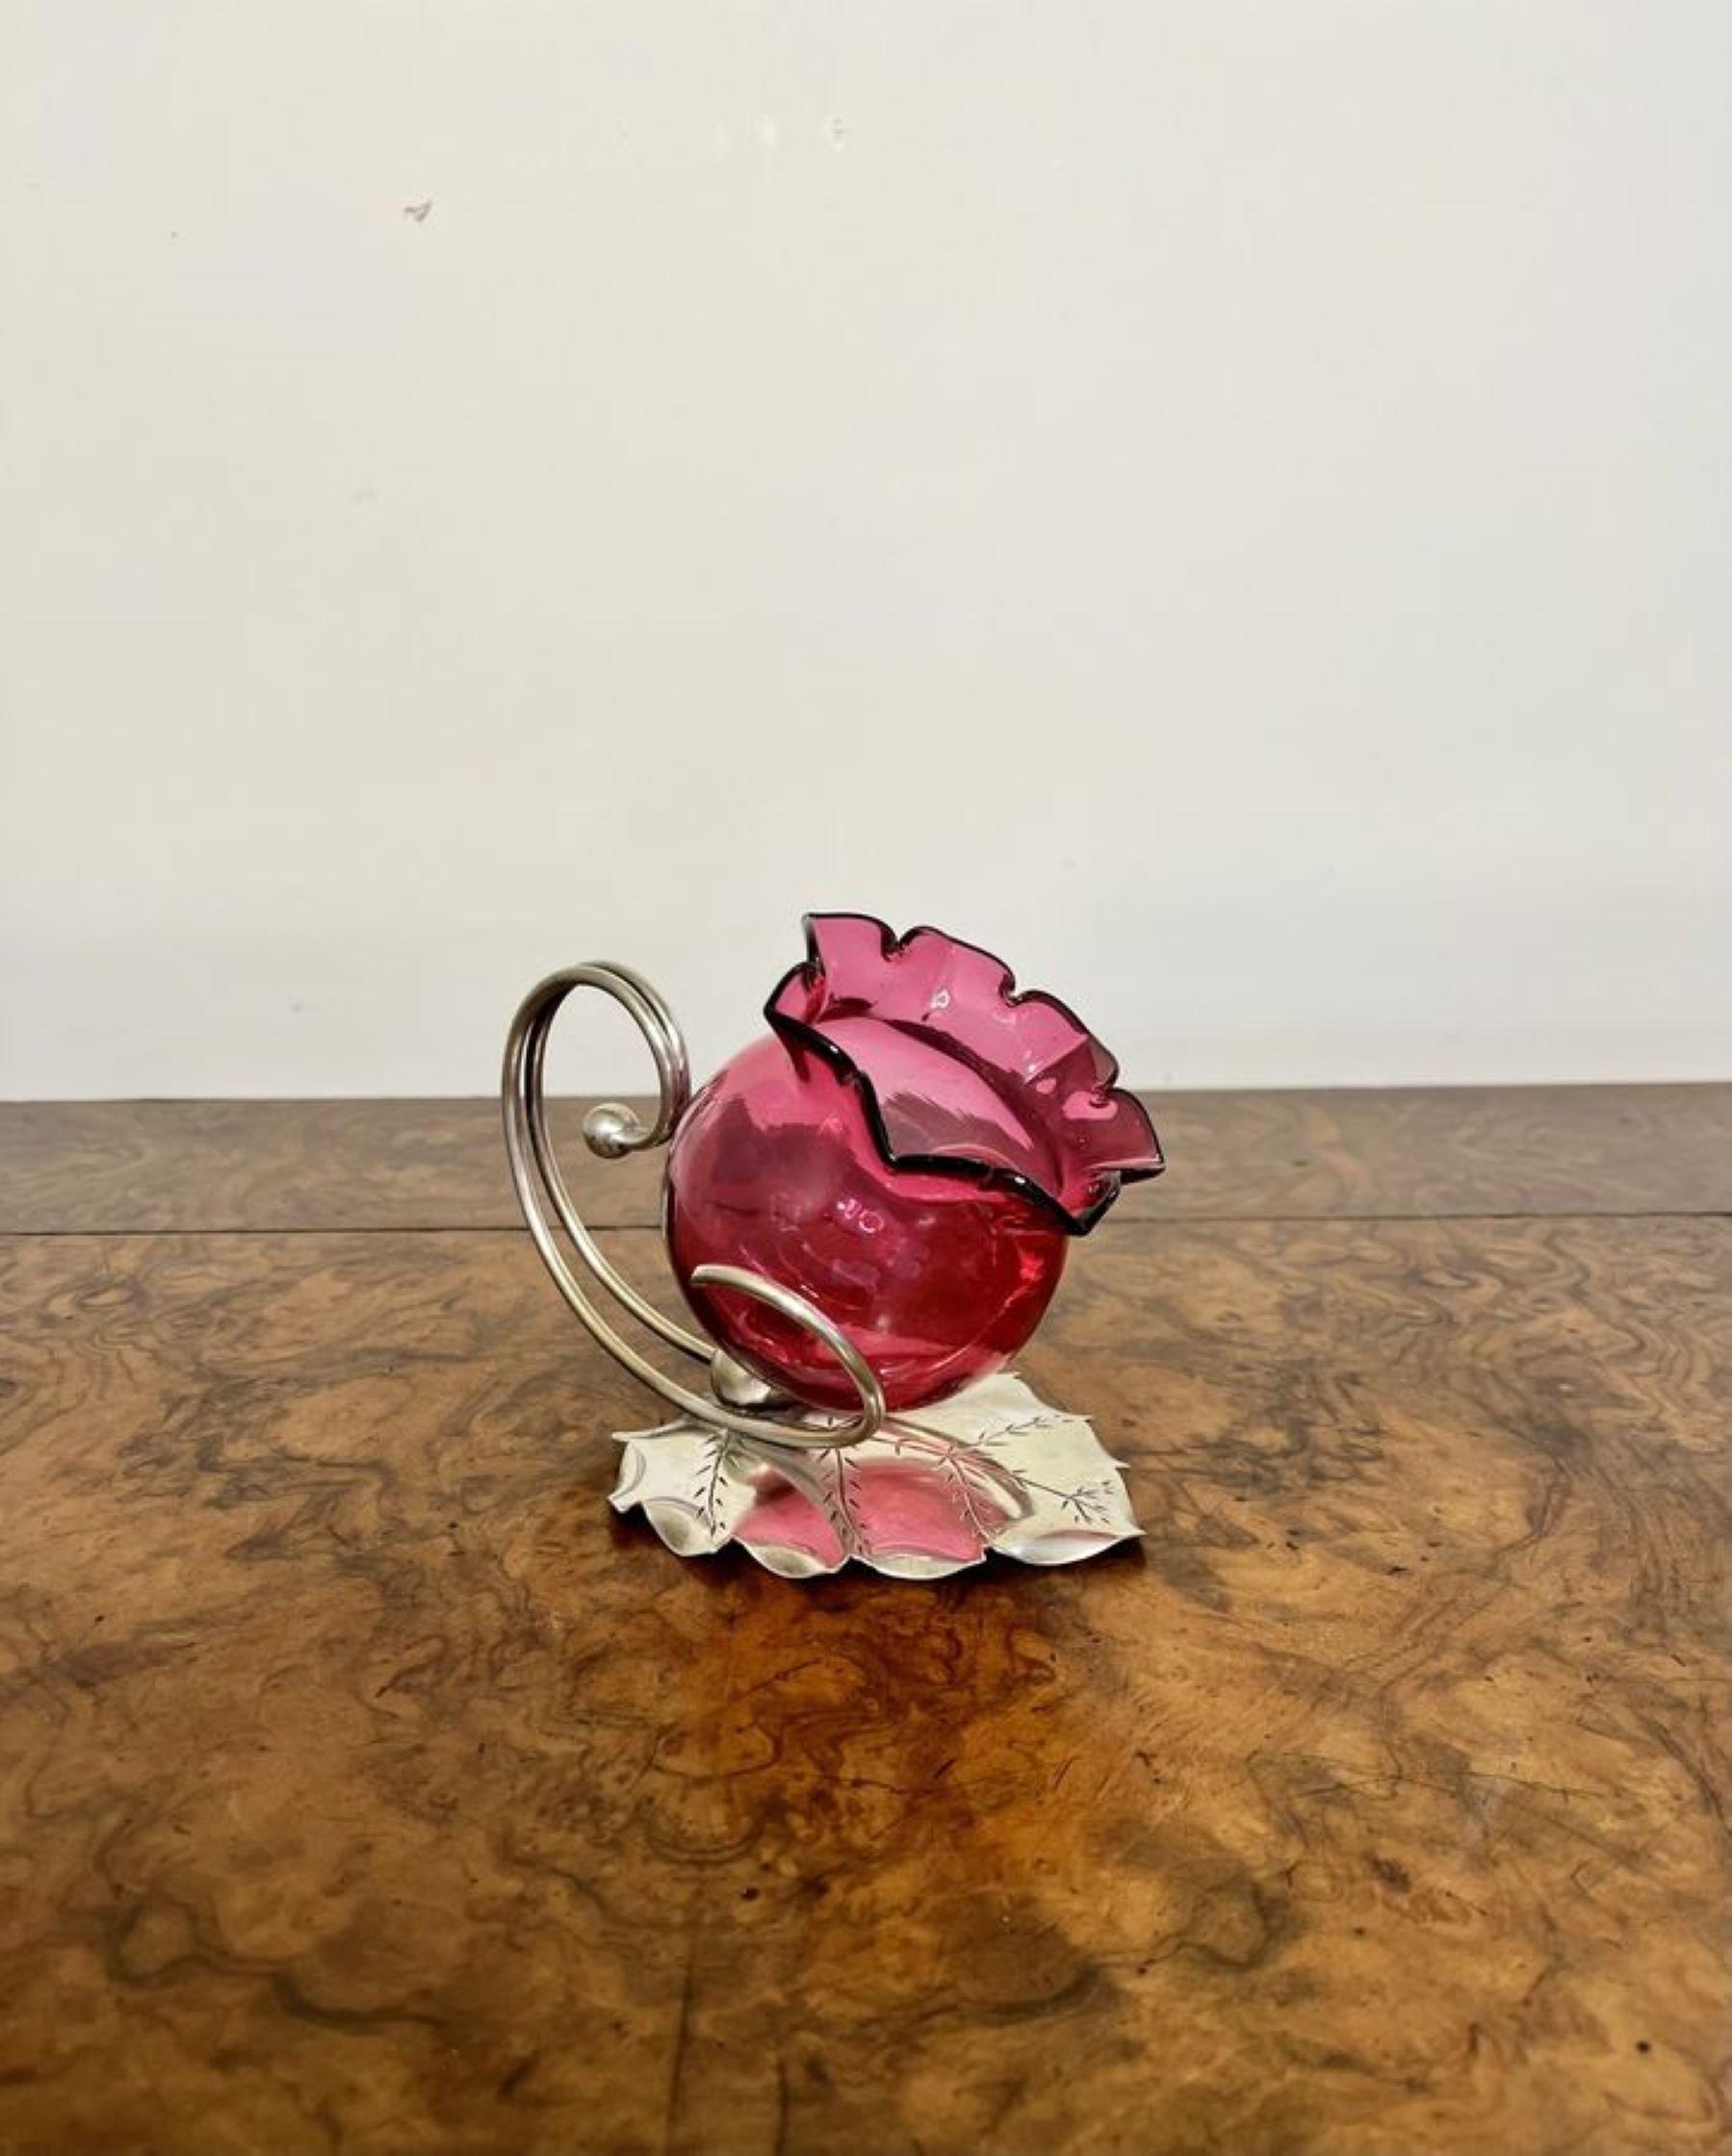 Unusual quality antique Edwardian cranberry glass candle holder having a silver plated stand in the shape of a leaf, a cranberry glass removable candle holder with a shaped handle to the back.

D. 1900